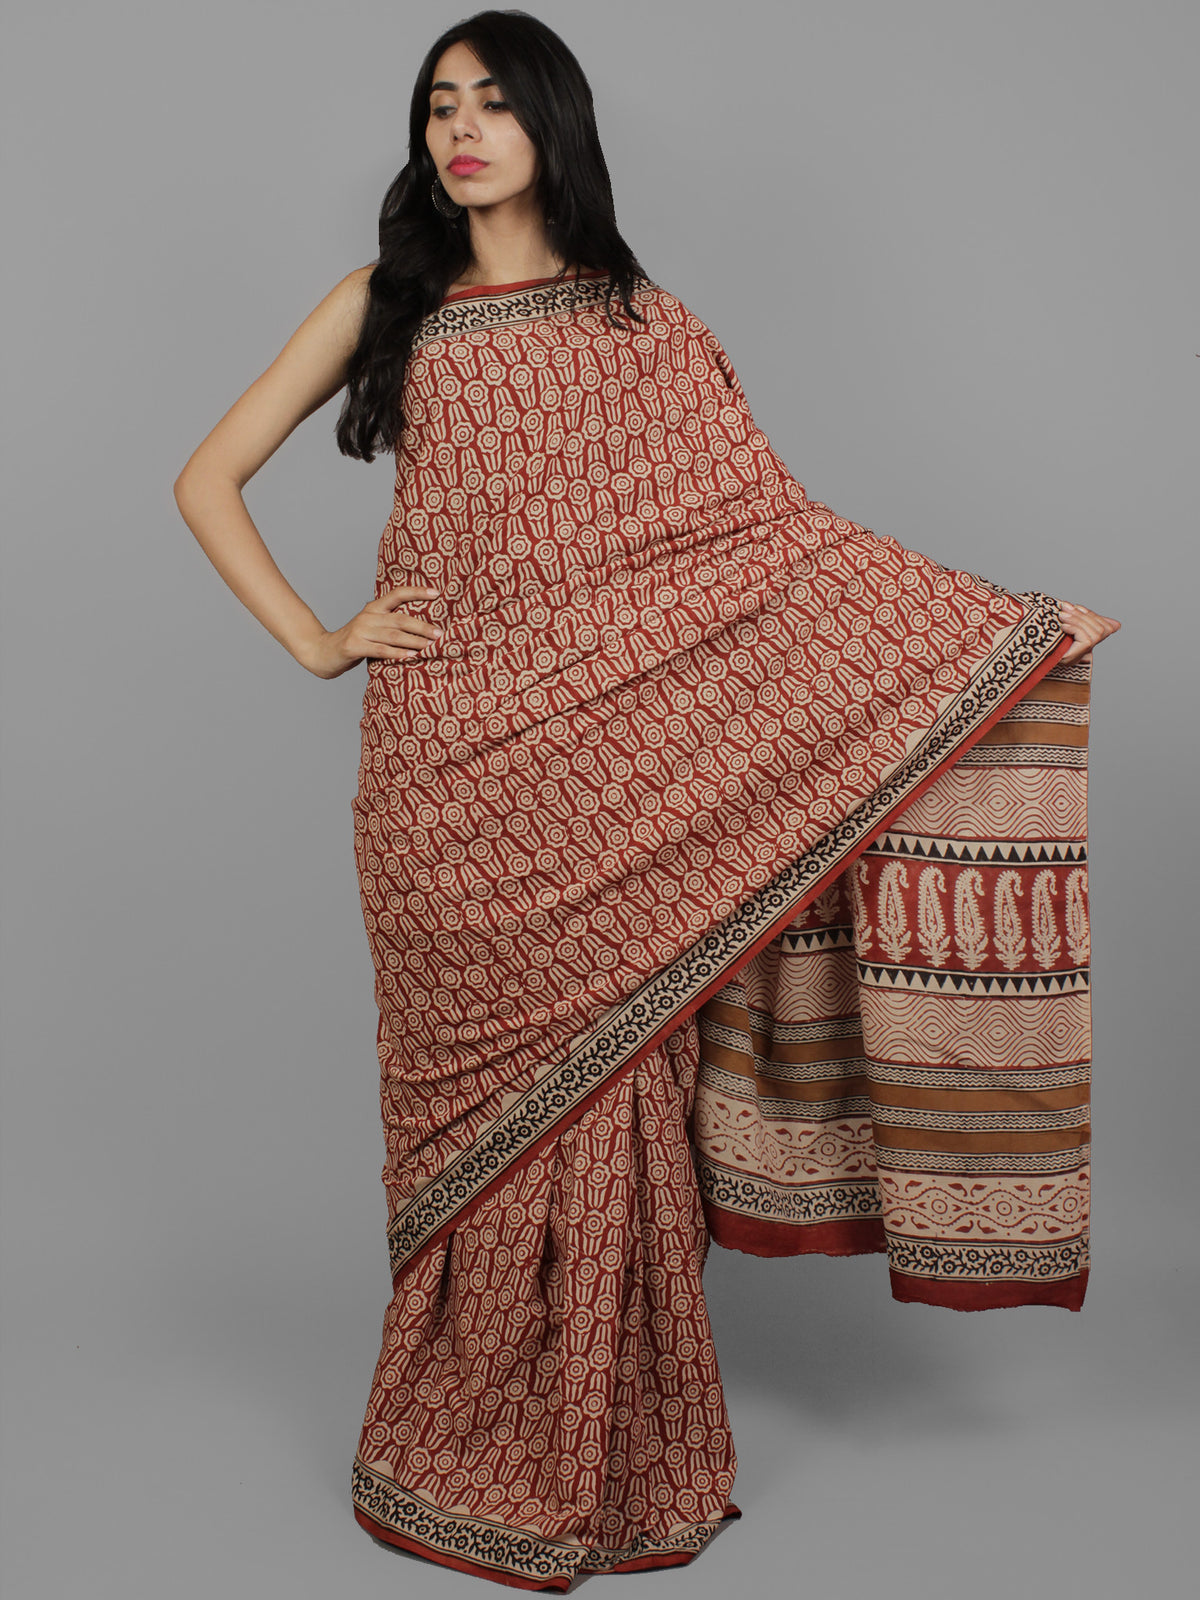 Maroon Beige Black Cotton Hand Block Printed Saree in Natural Colors - S031702127